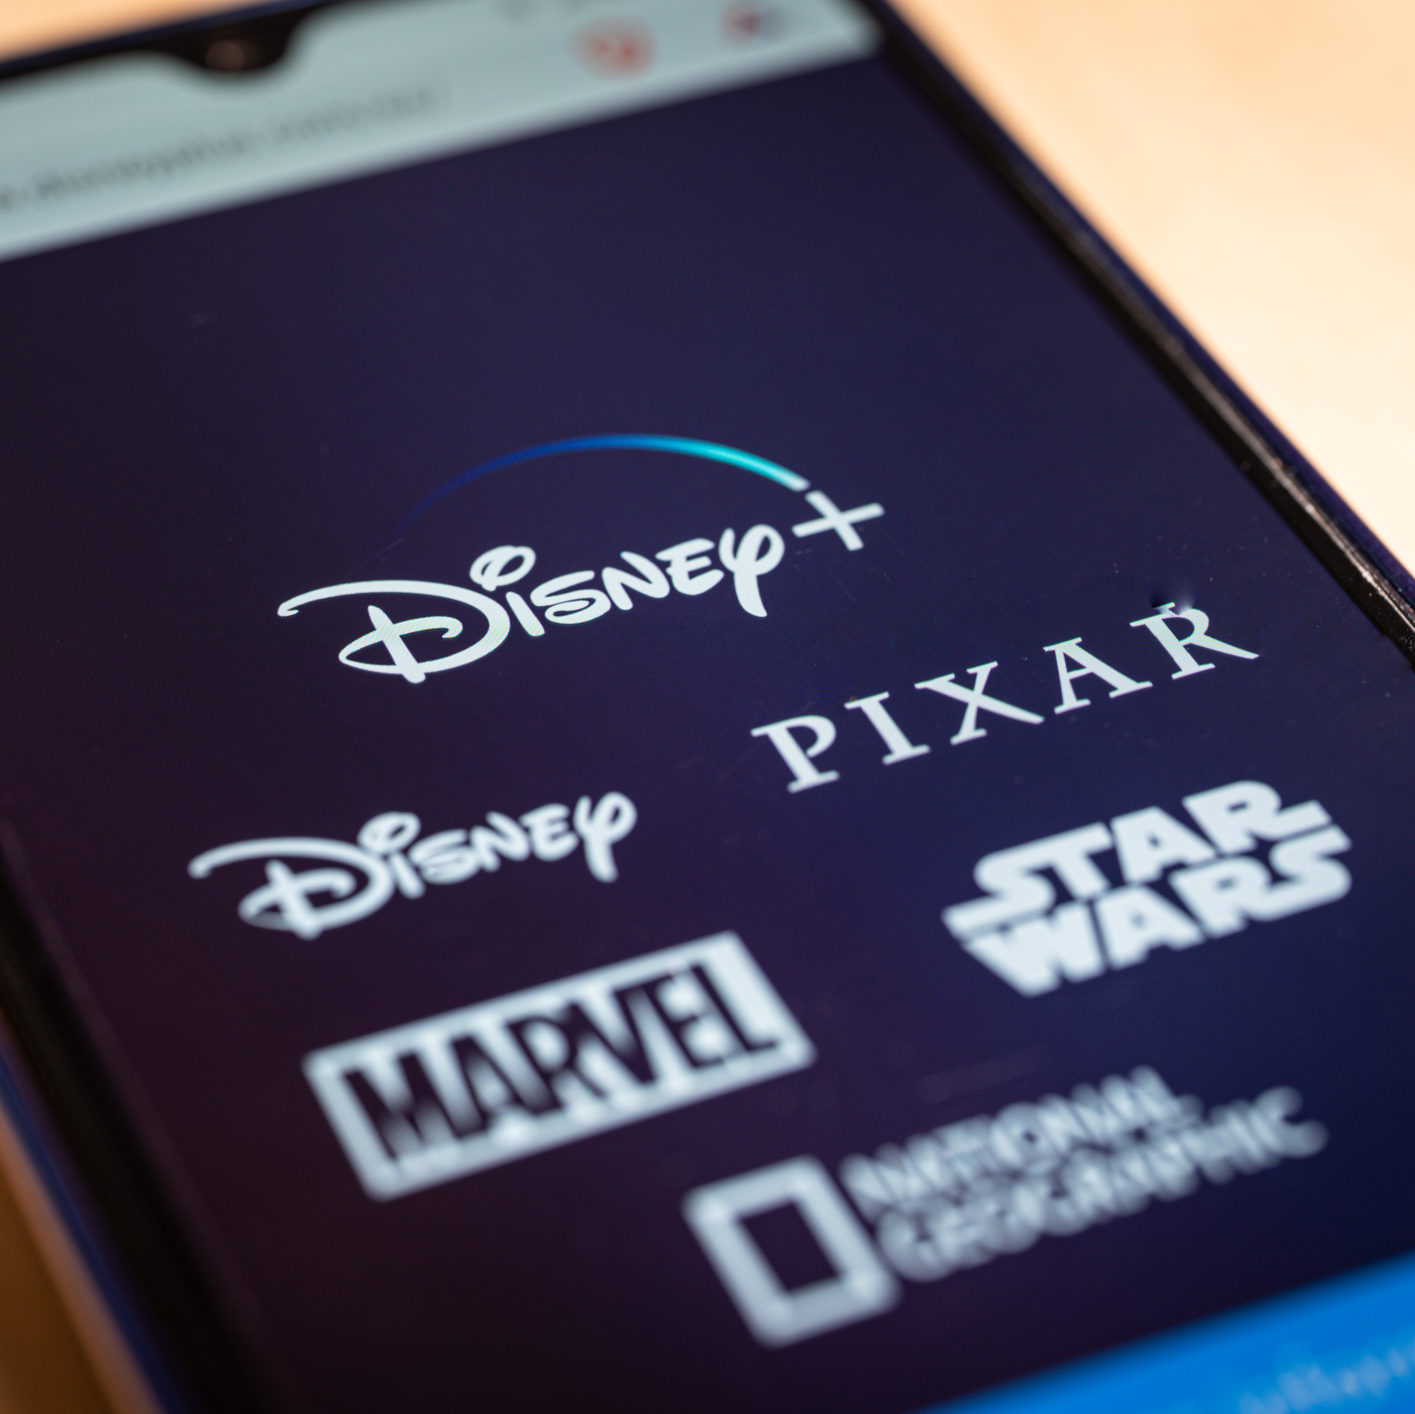 Disney+ Basic is just $2 for the first 3 months